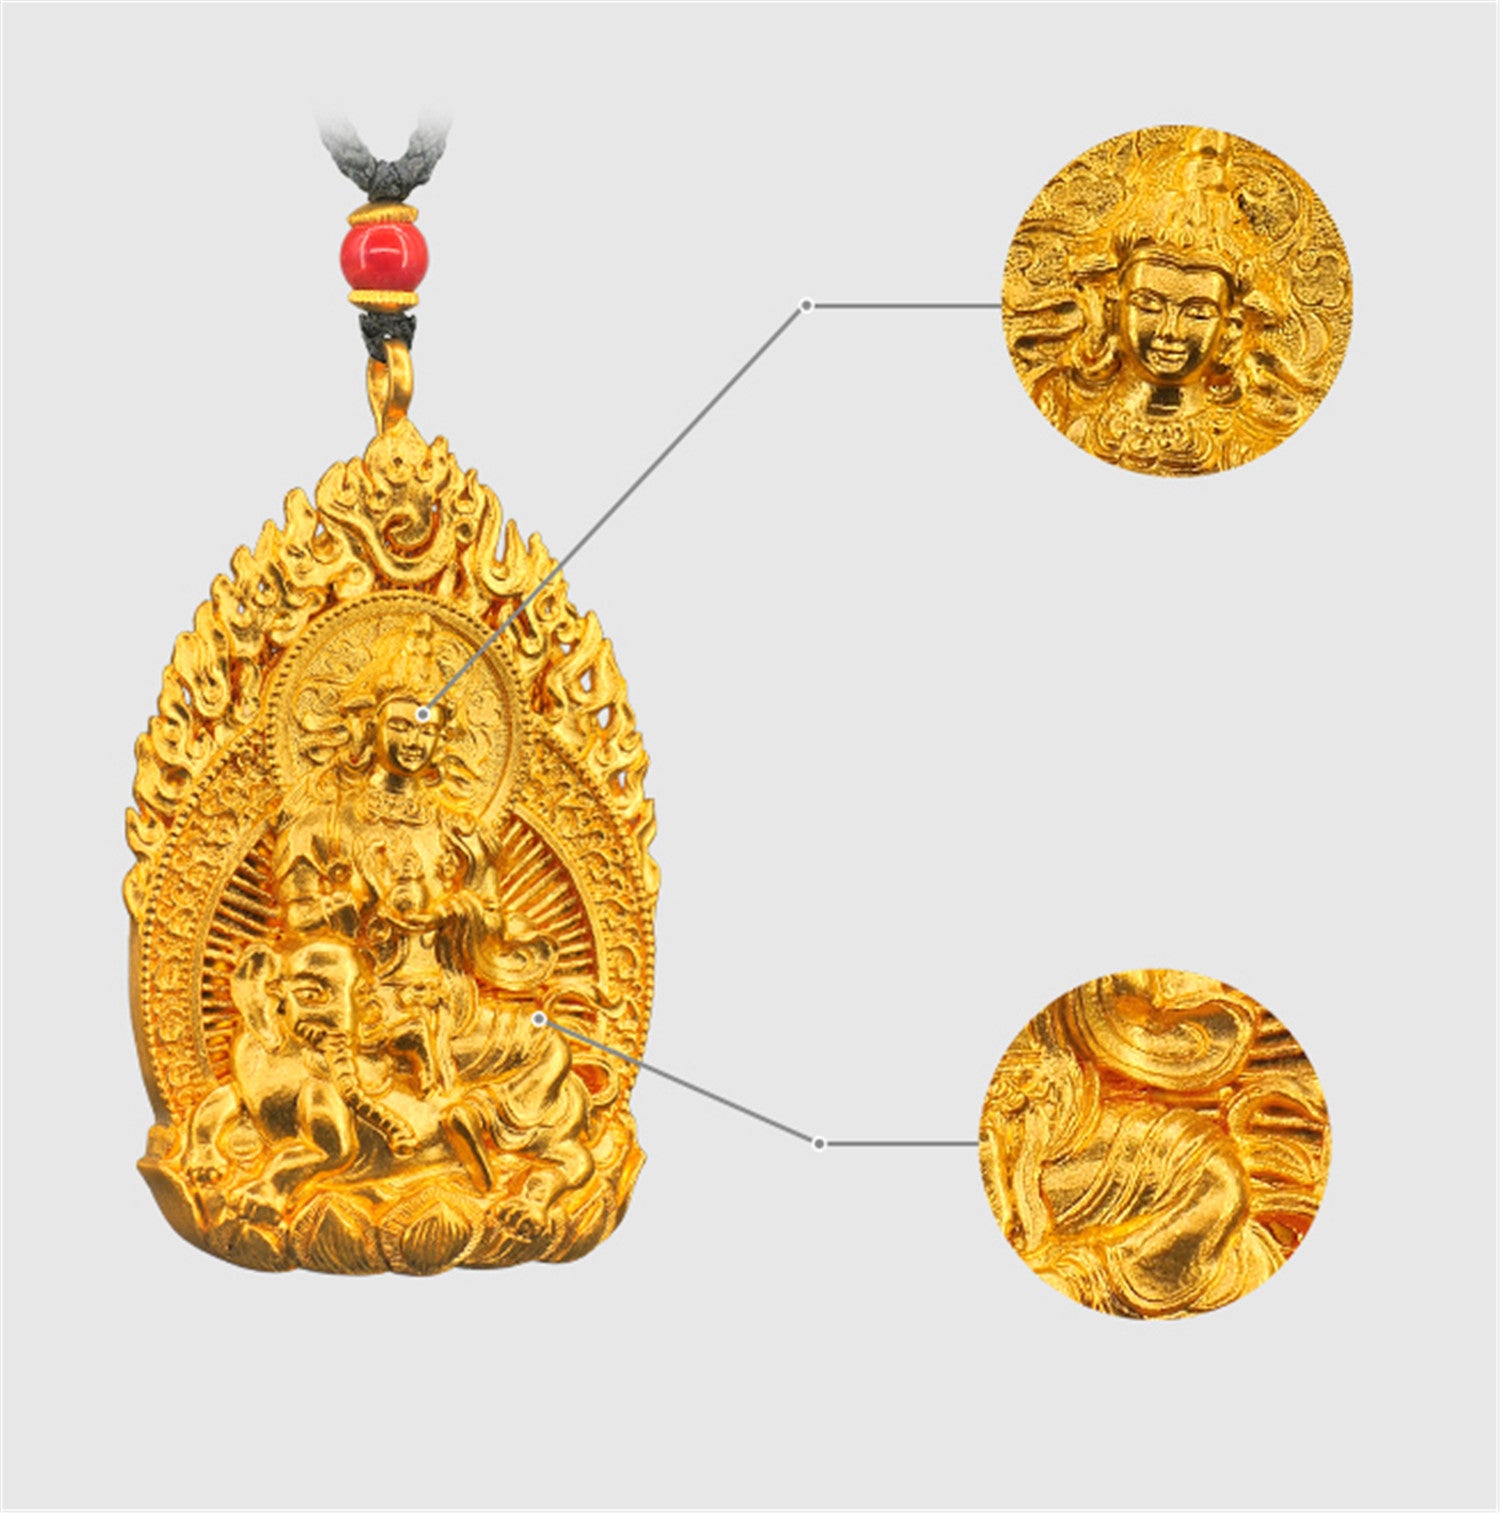 EVECOCO Full Gold Buddha Pendants,Micro Relief,Hand Forging,Filigree,Fine Carving 60g